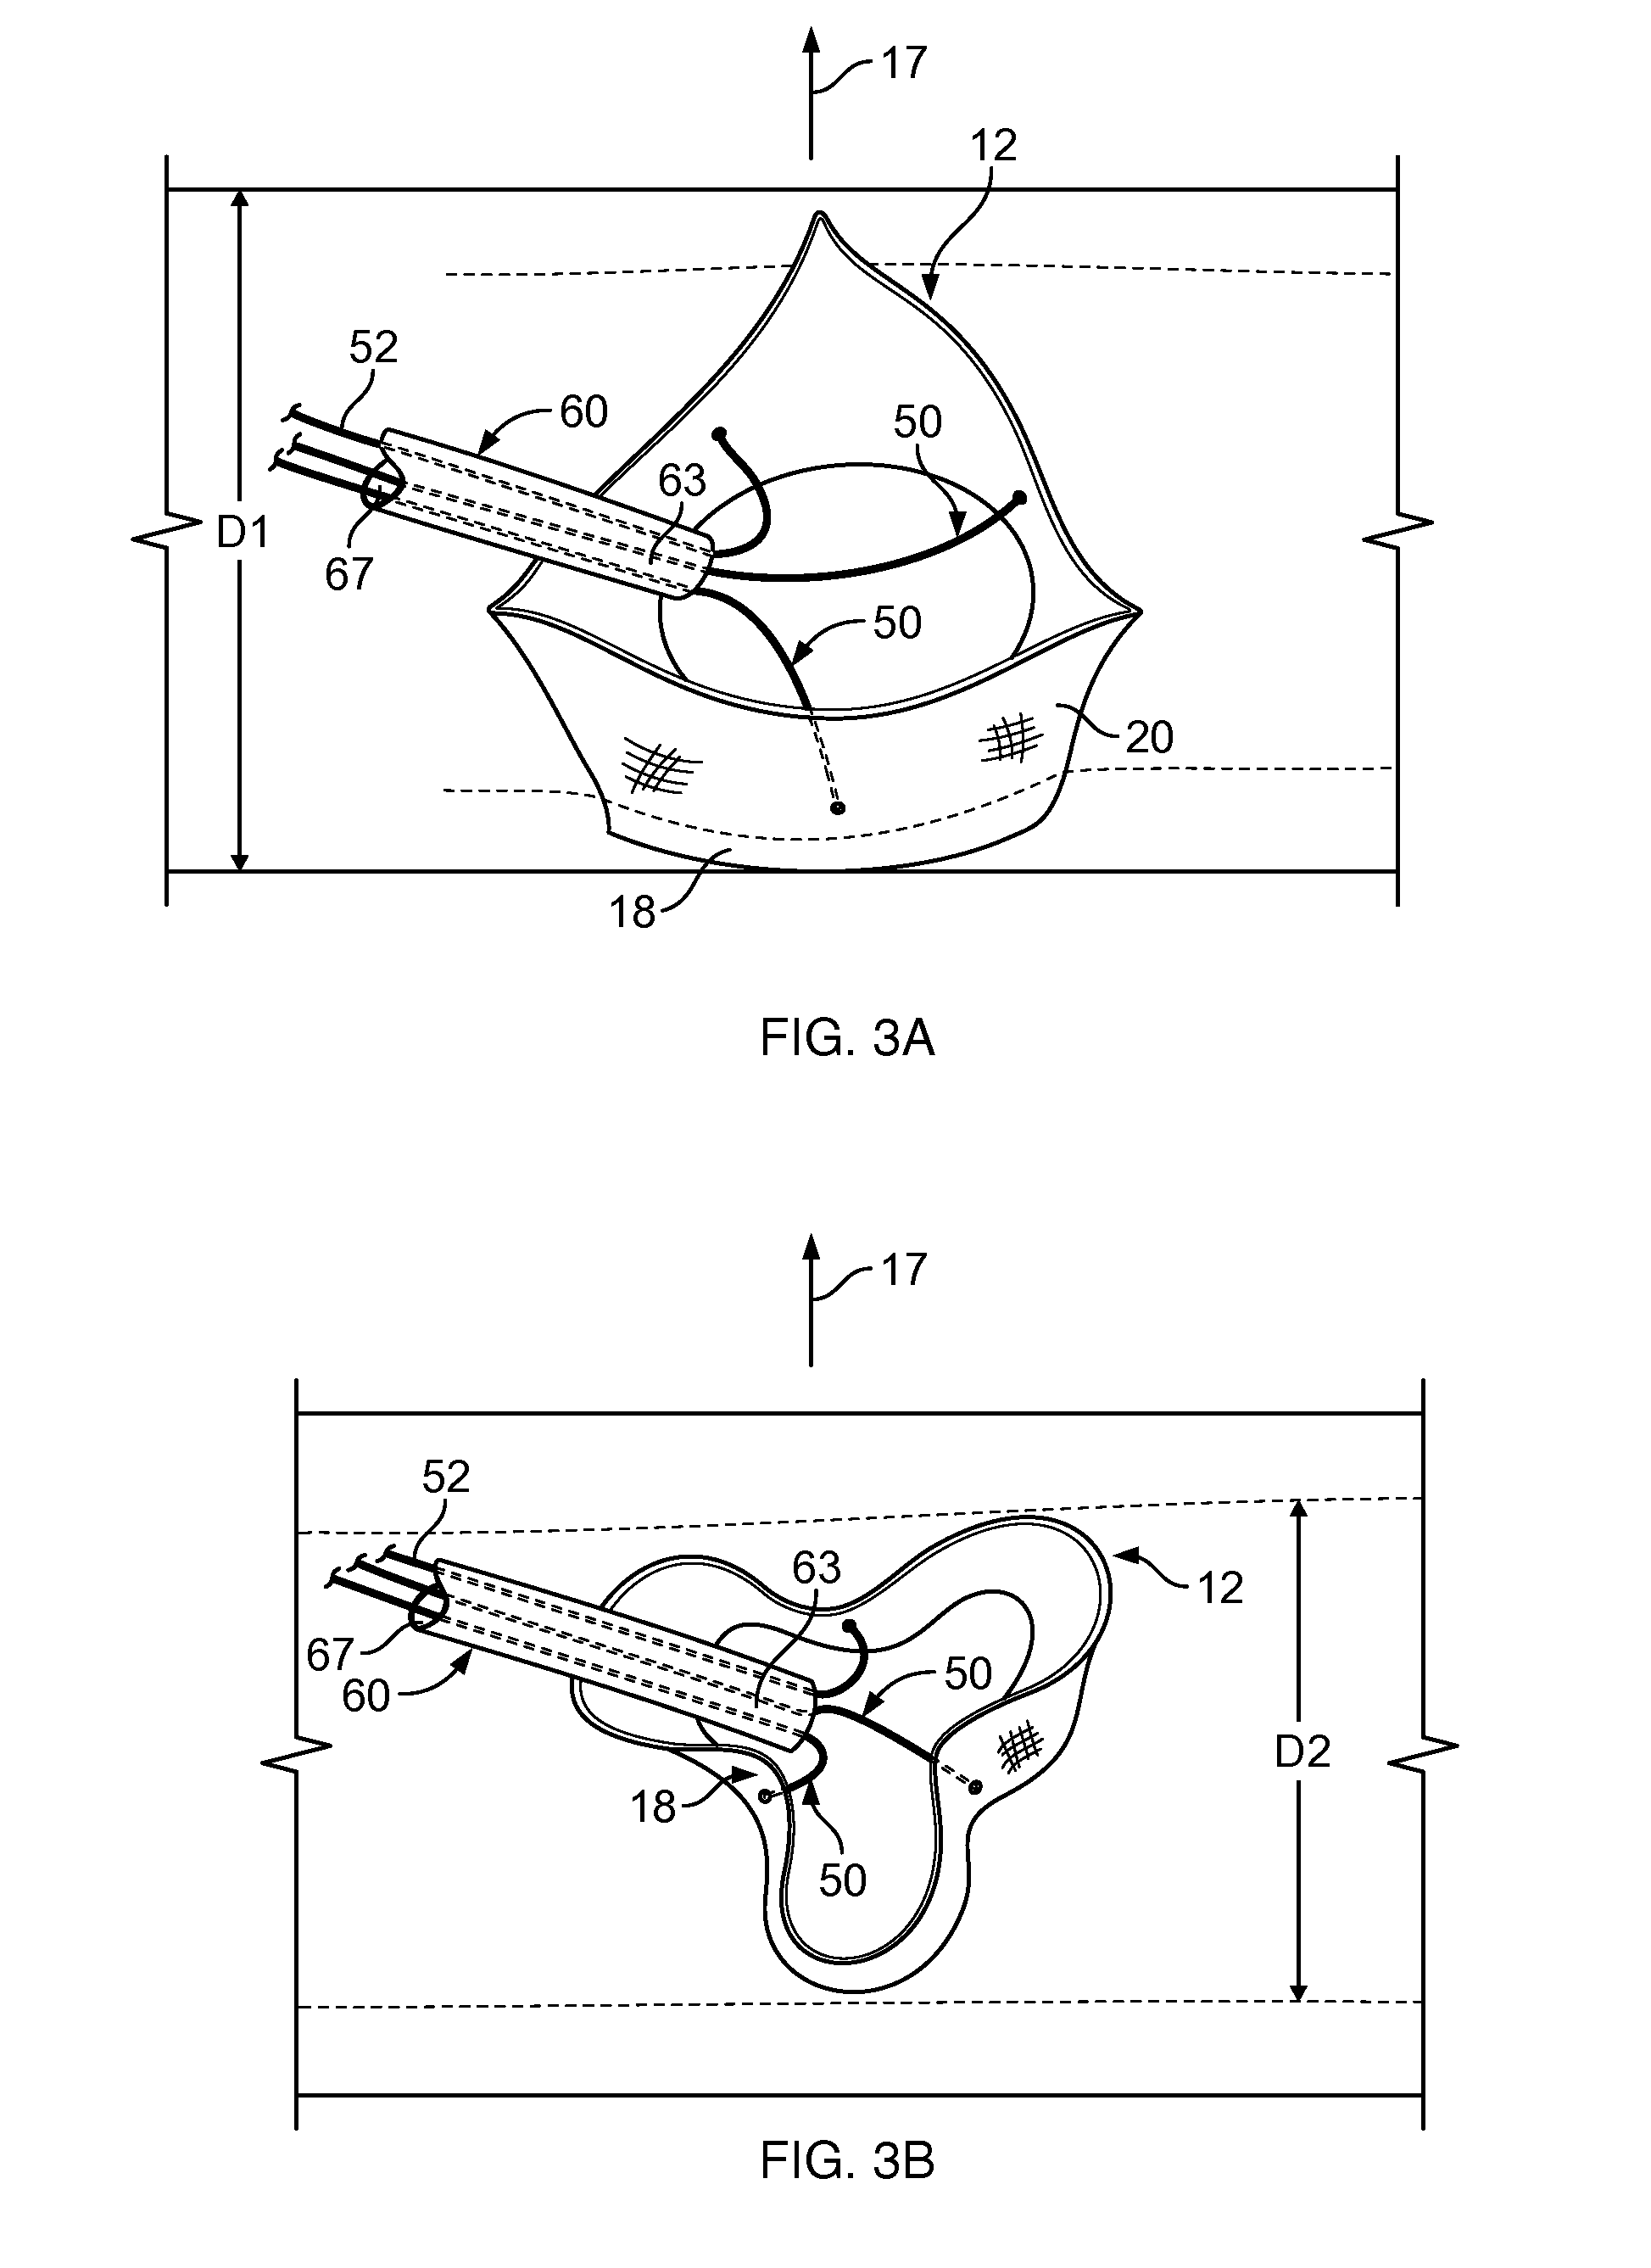 Multiple component prosthetic heart valve assemblies and apparatus for delivering them